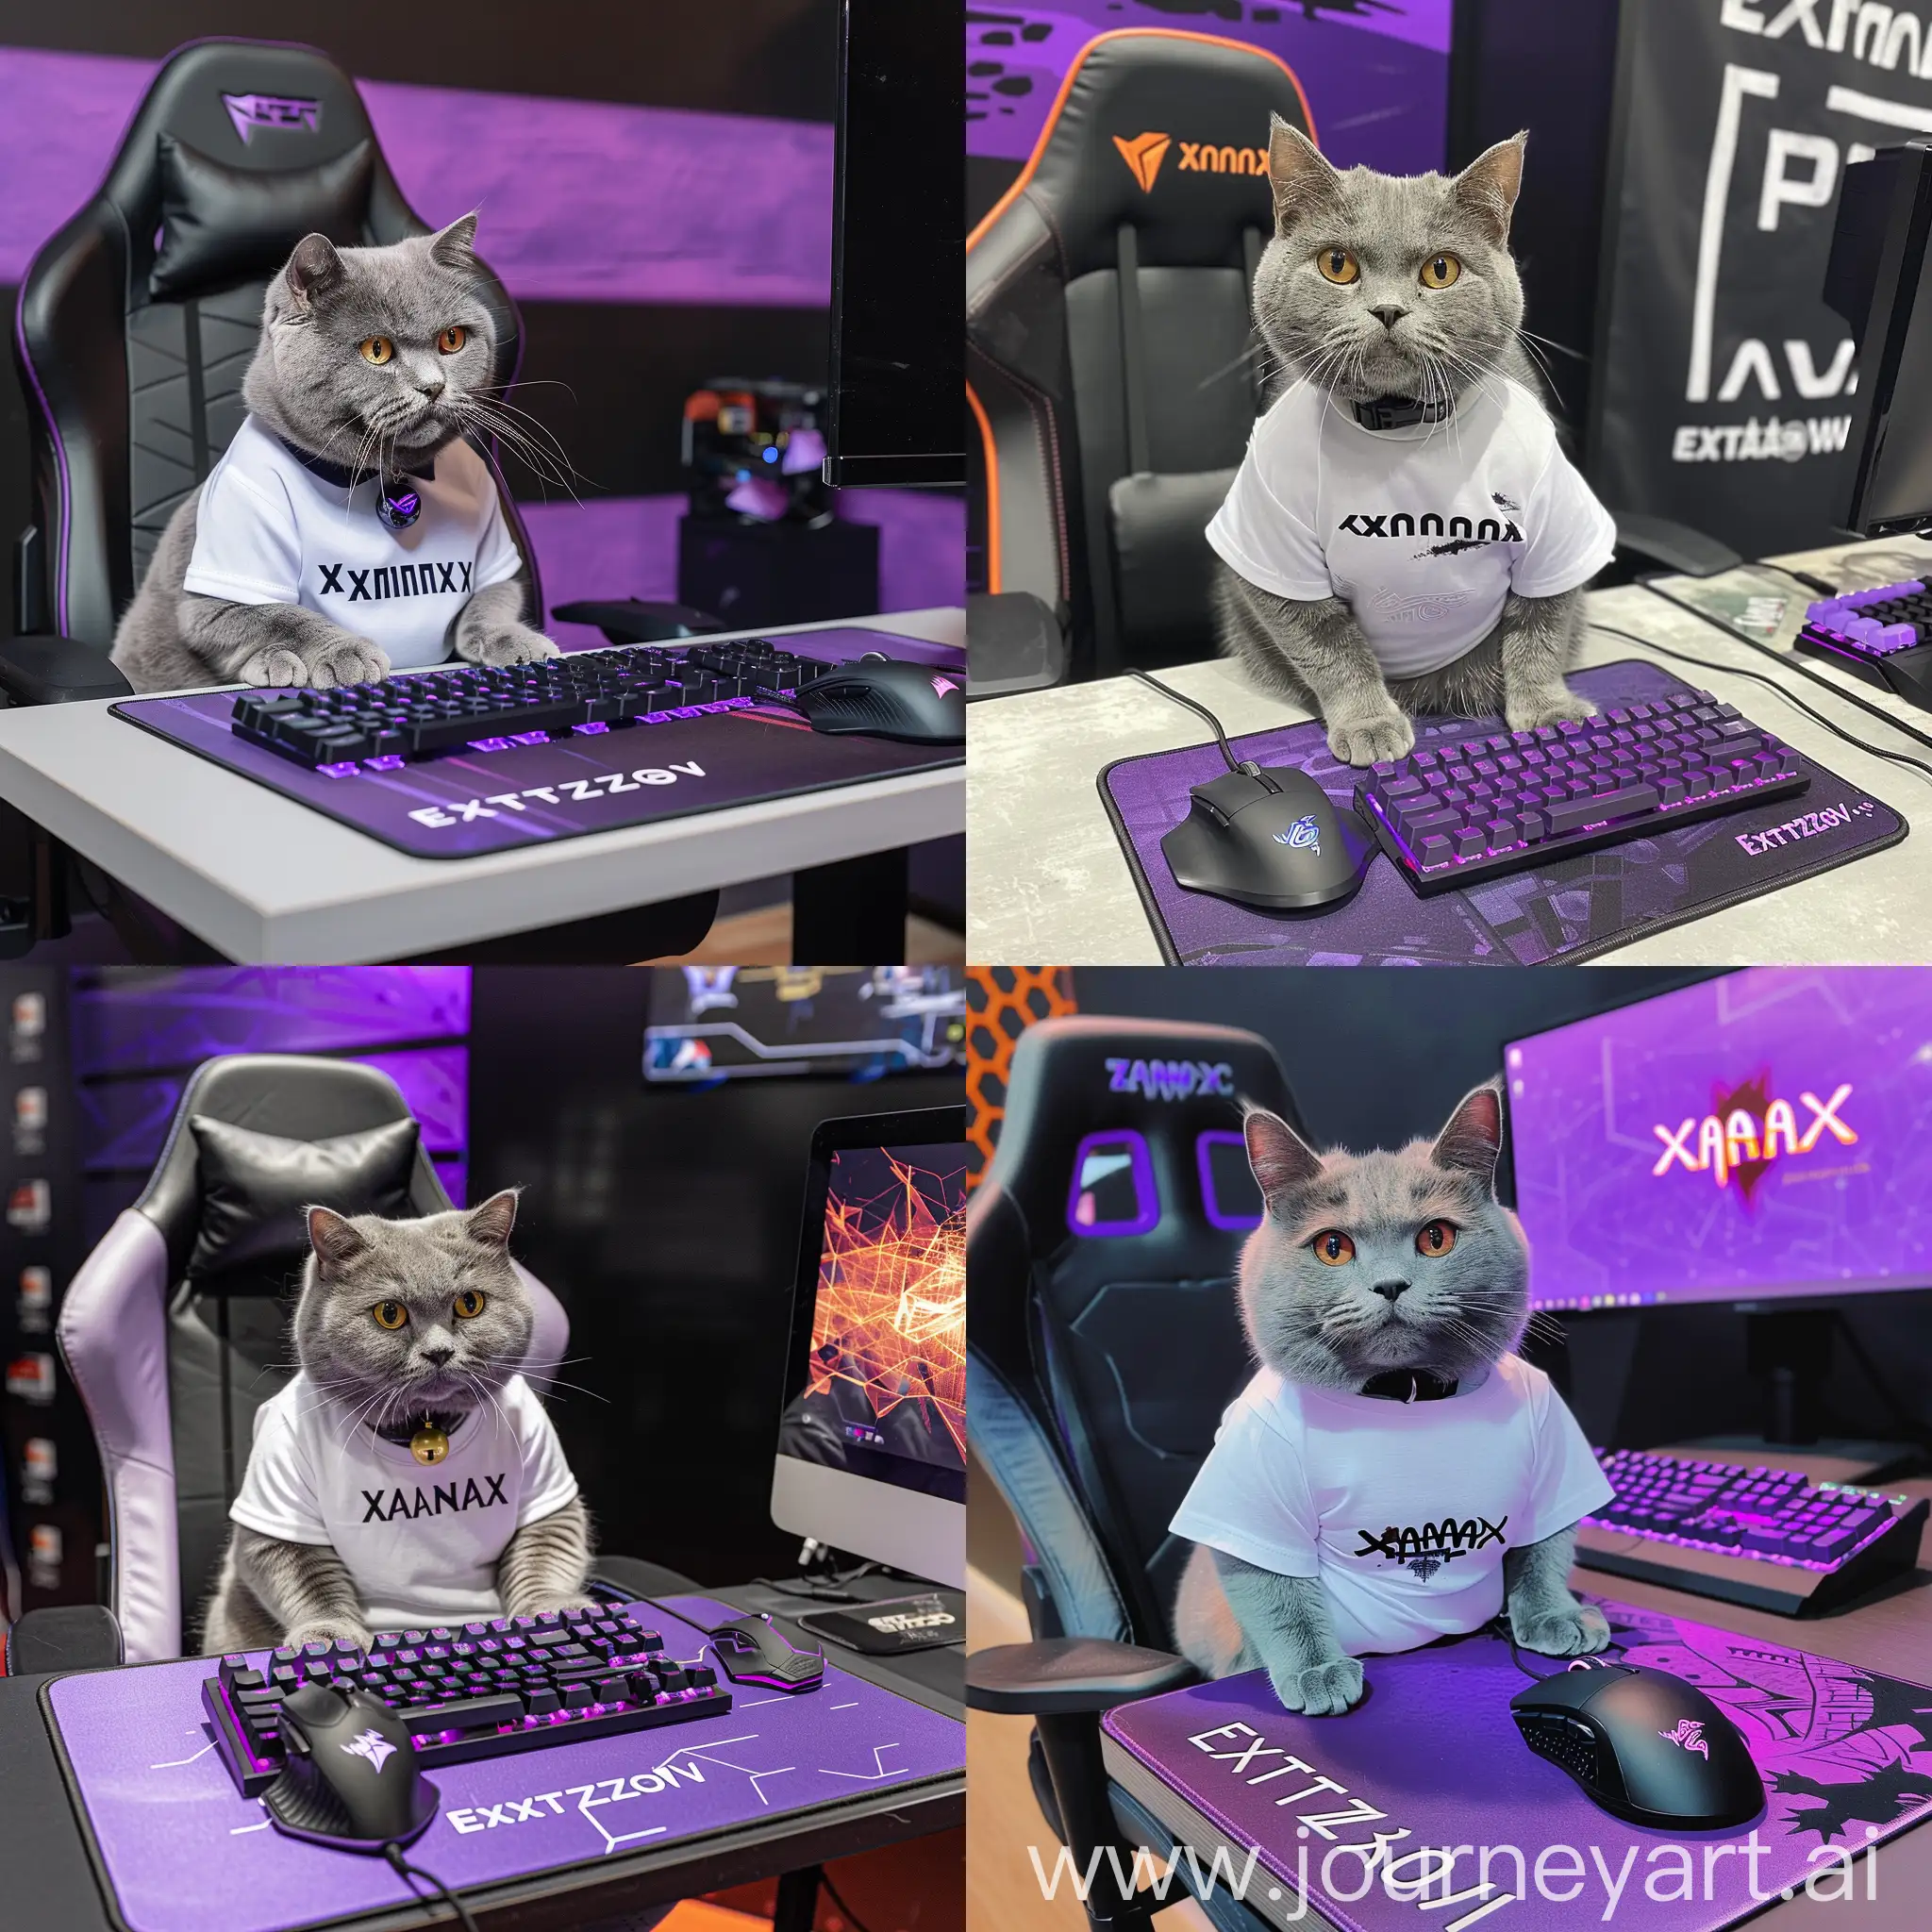 A gray cat of the British breed sits on a computer chair at a table on which there is a purple keyboard and a black gaming mouse, behind the cat there is a black and purple wall, the cat is dressed in a white T-shirt with text"XANAX" written in the center of T-shirt , text"ExtaZoV" written on the gaming mat under the gaming mouse